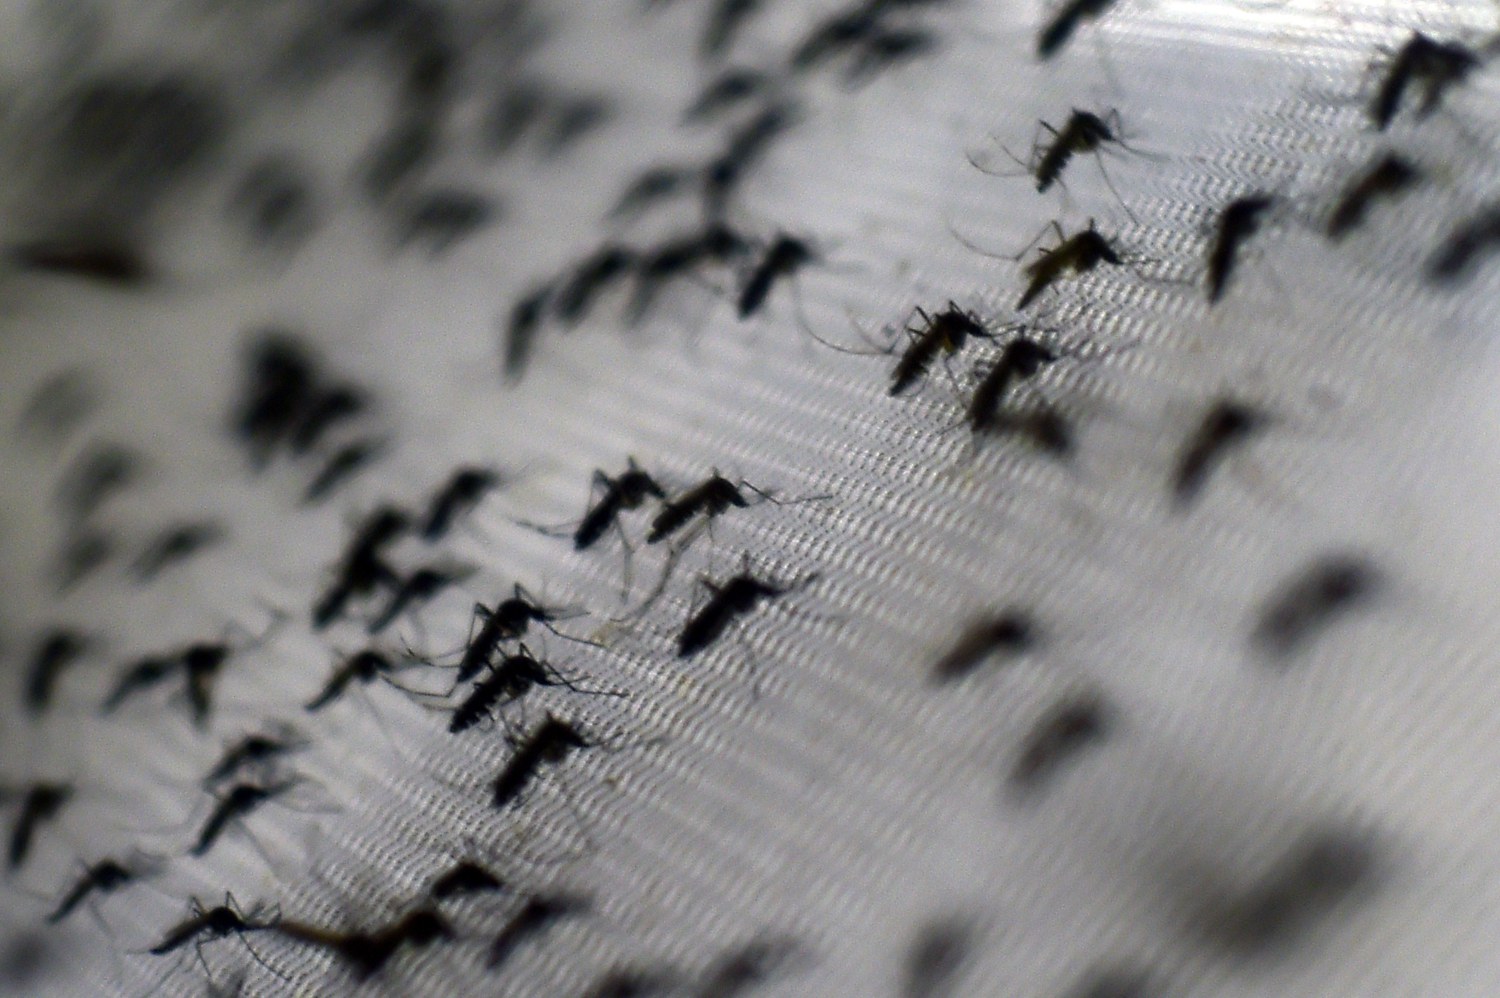 Miami-Dade Fights Mosquitoes With Aerial Spraying